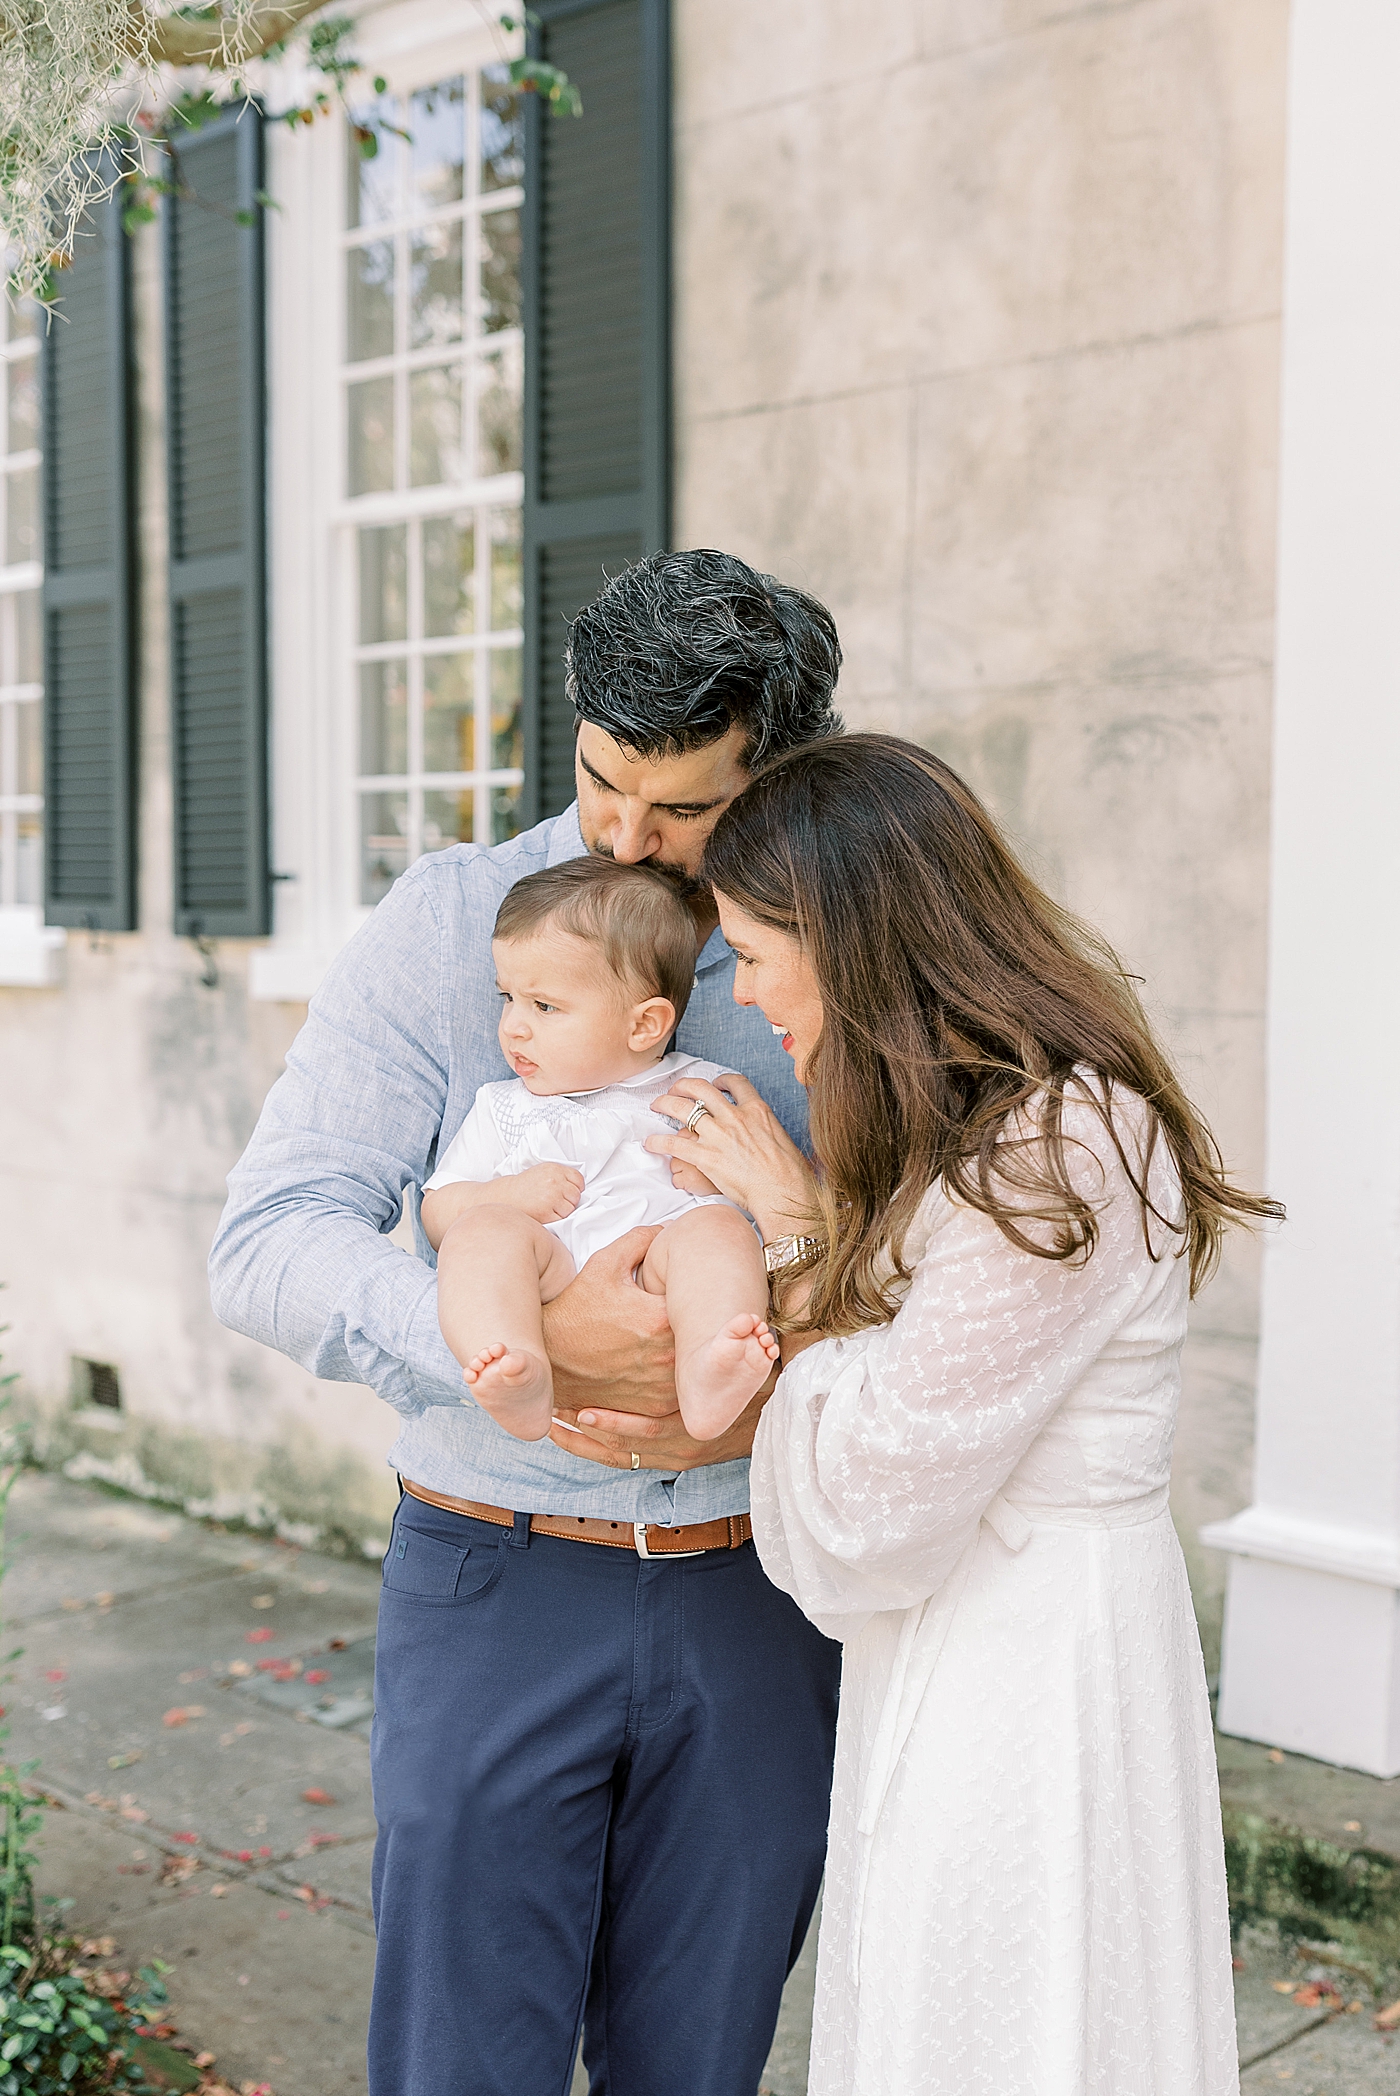 Husband and wife holding, kissing, smiling and looking at baby | Images by Caitlyn Motycka